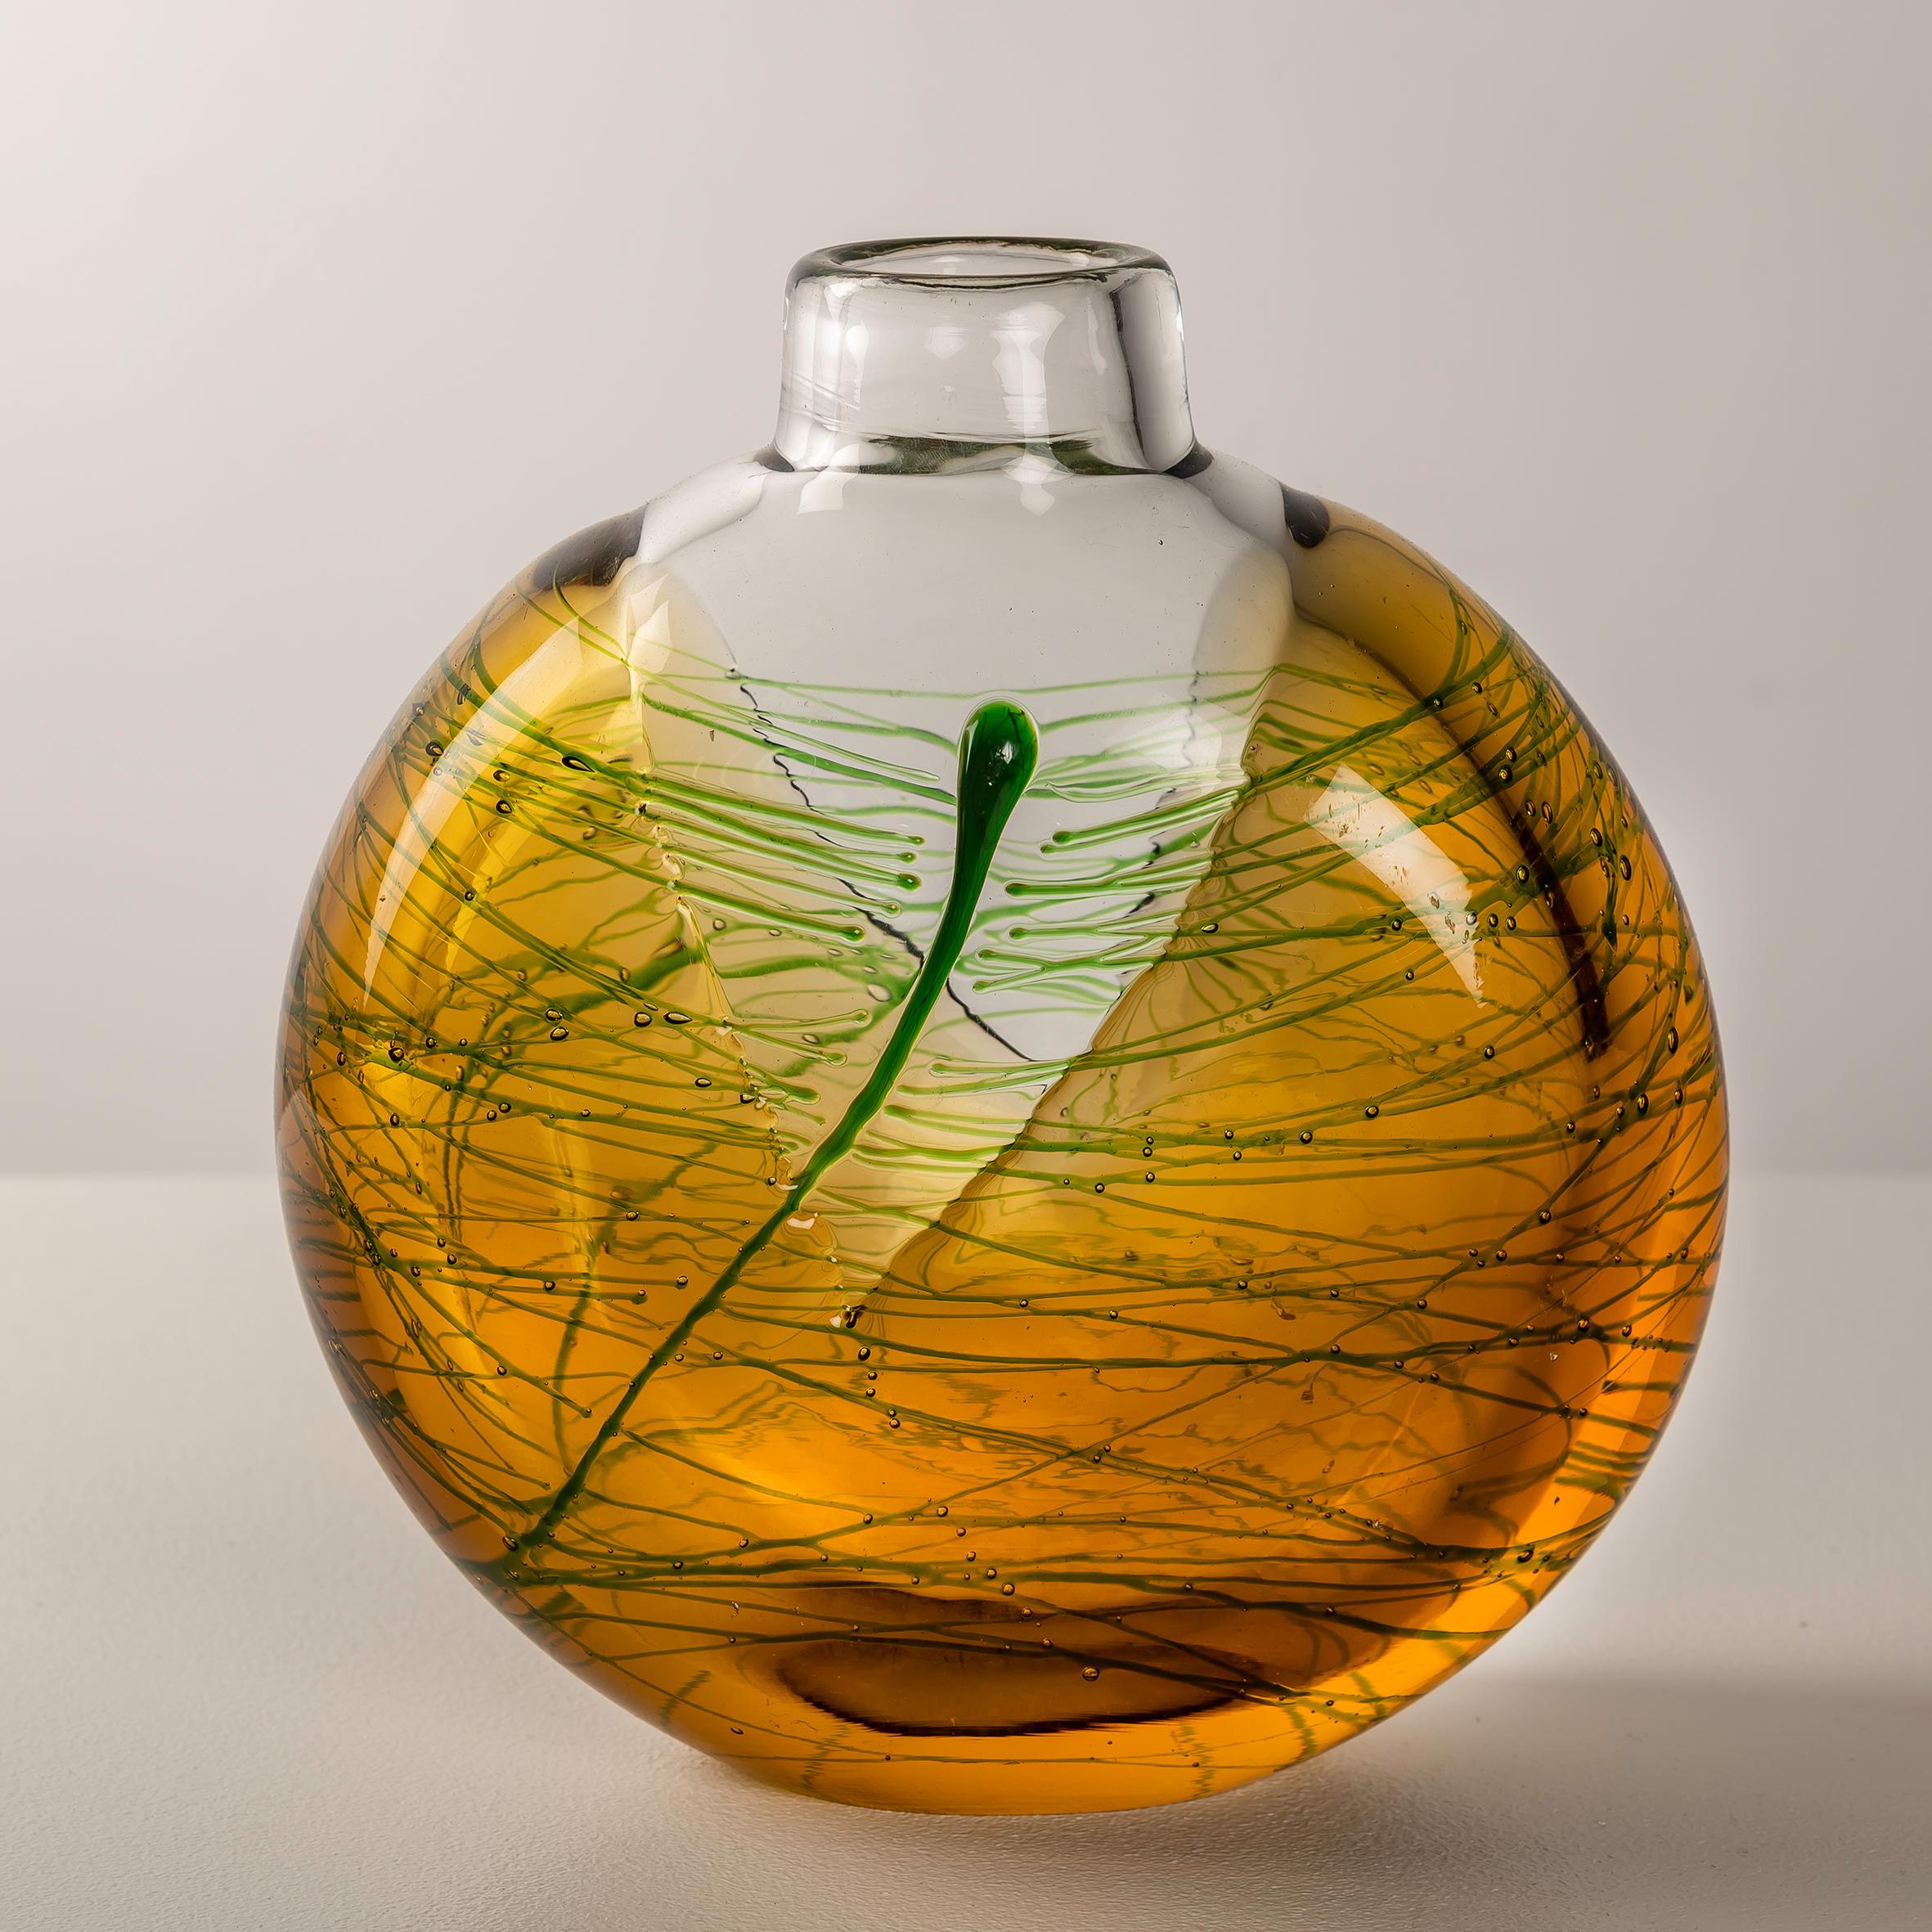 Investing in this Mid-Century Glass Vase by Jiri Suhajek for Moser, originating from the 1970s, offers a unique opportunity to own a piece of artistry that seamlessly blends elegance with innovation. Jiri Suhajek, known for his innovative glass